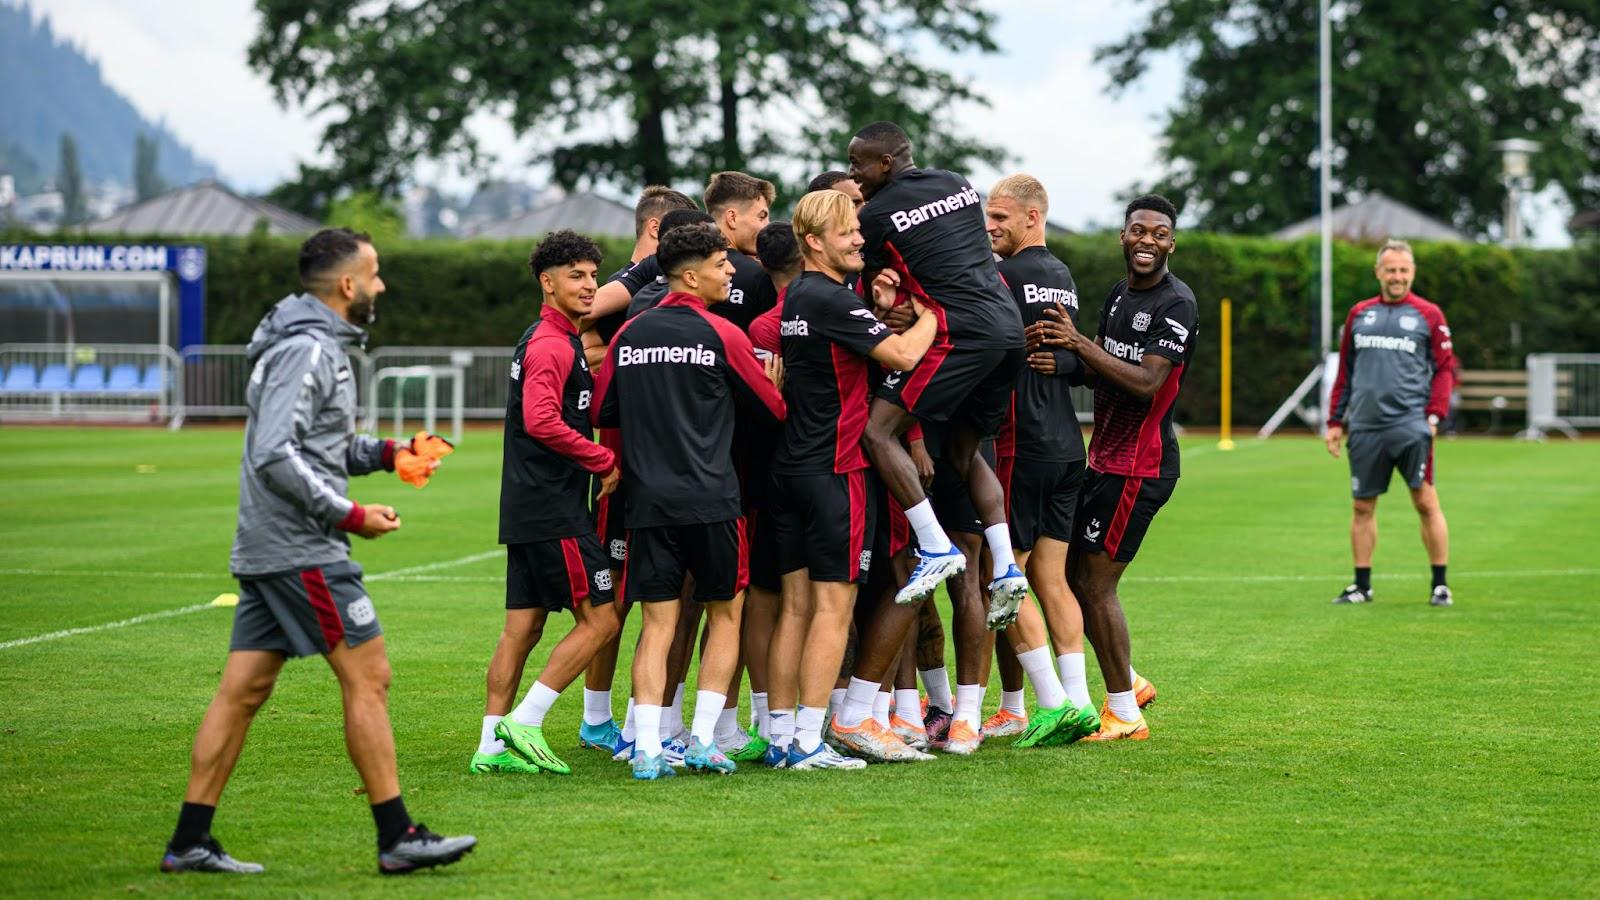 Bayer Leverkusen have a young squad brimming with talent